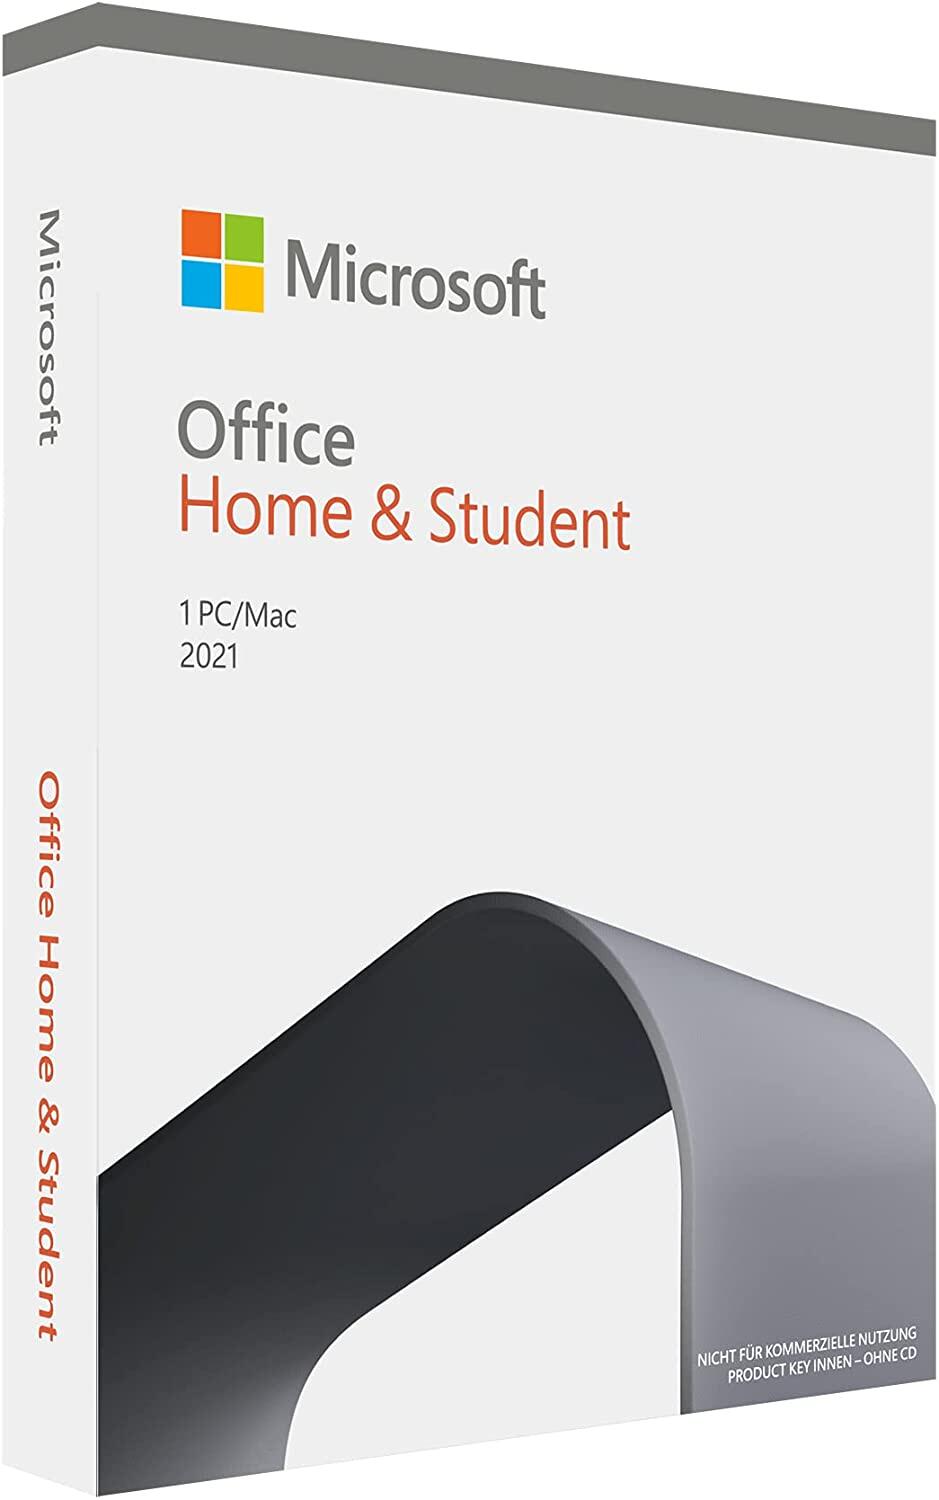 Microsoft Office Home and Student 2021 79G-05339 ESD, 1 PC/Mac user(s), All Languages